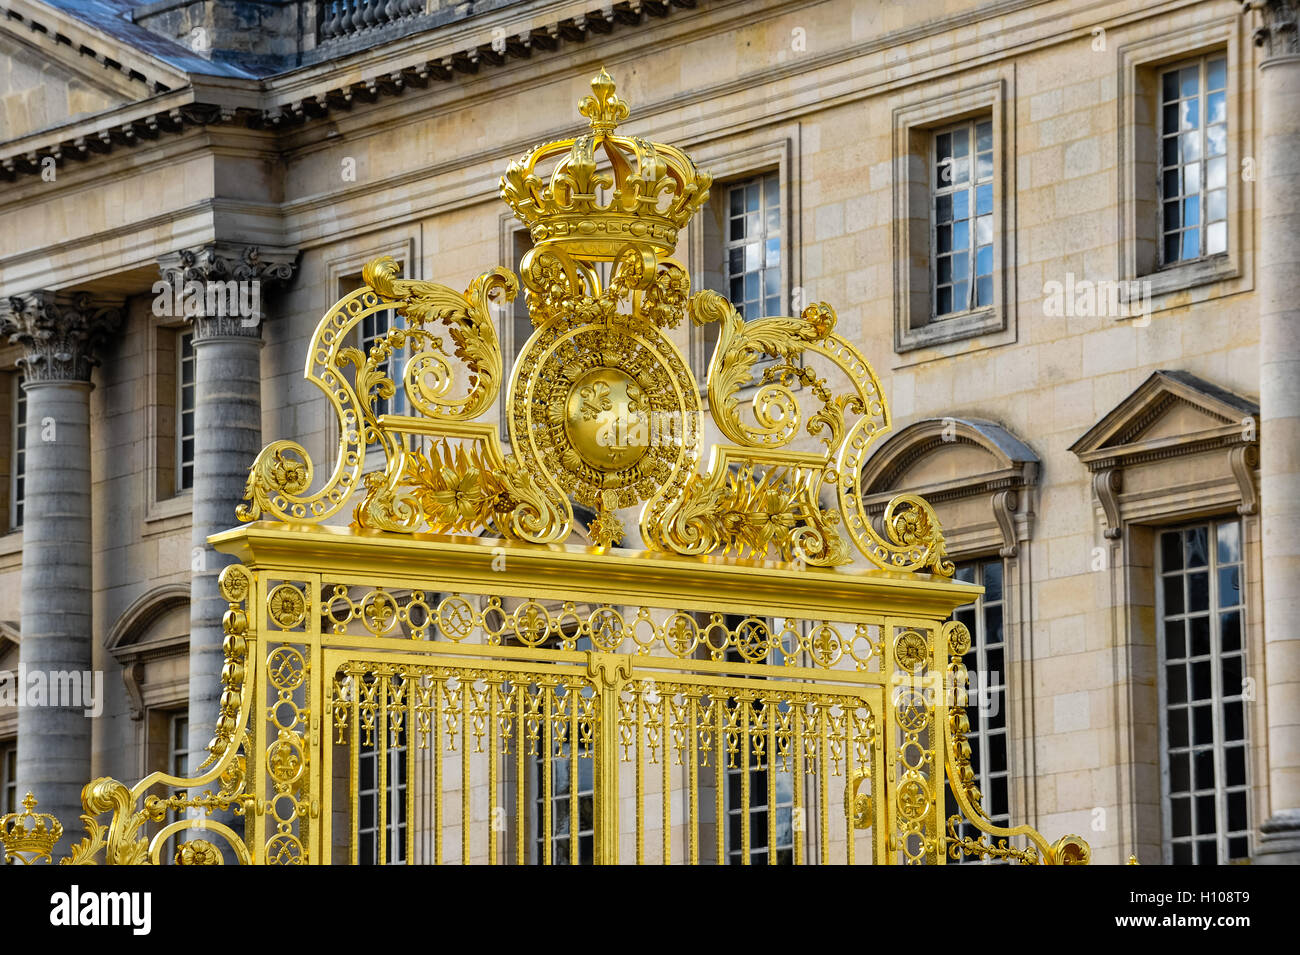 The Palace of Versailles, or simply Versailles, is a royal château close to Paris, France. Pavillon Gabriel in the background. Stock Photo